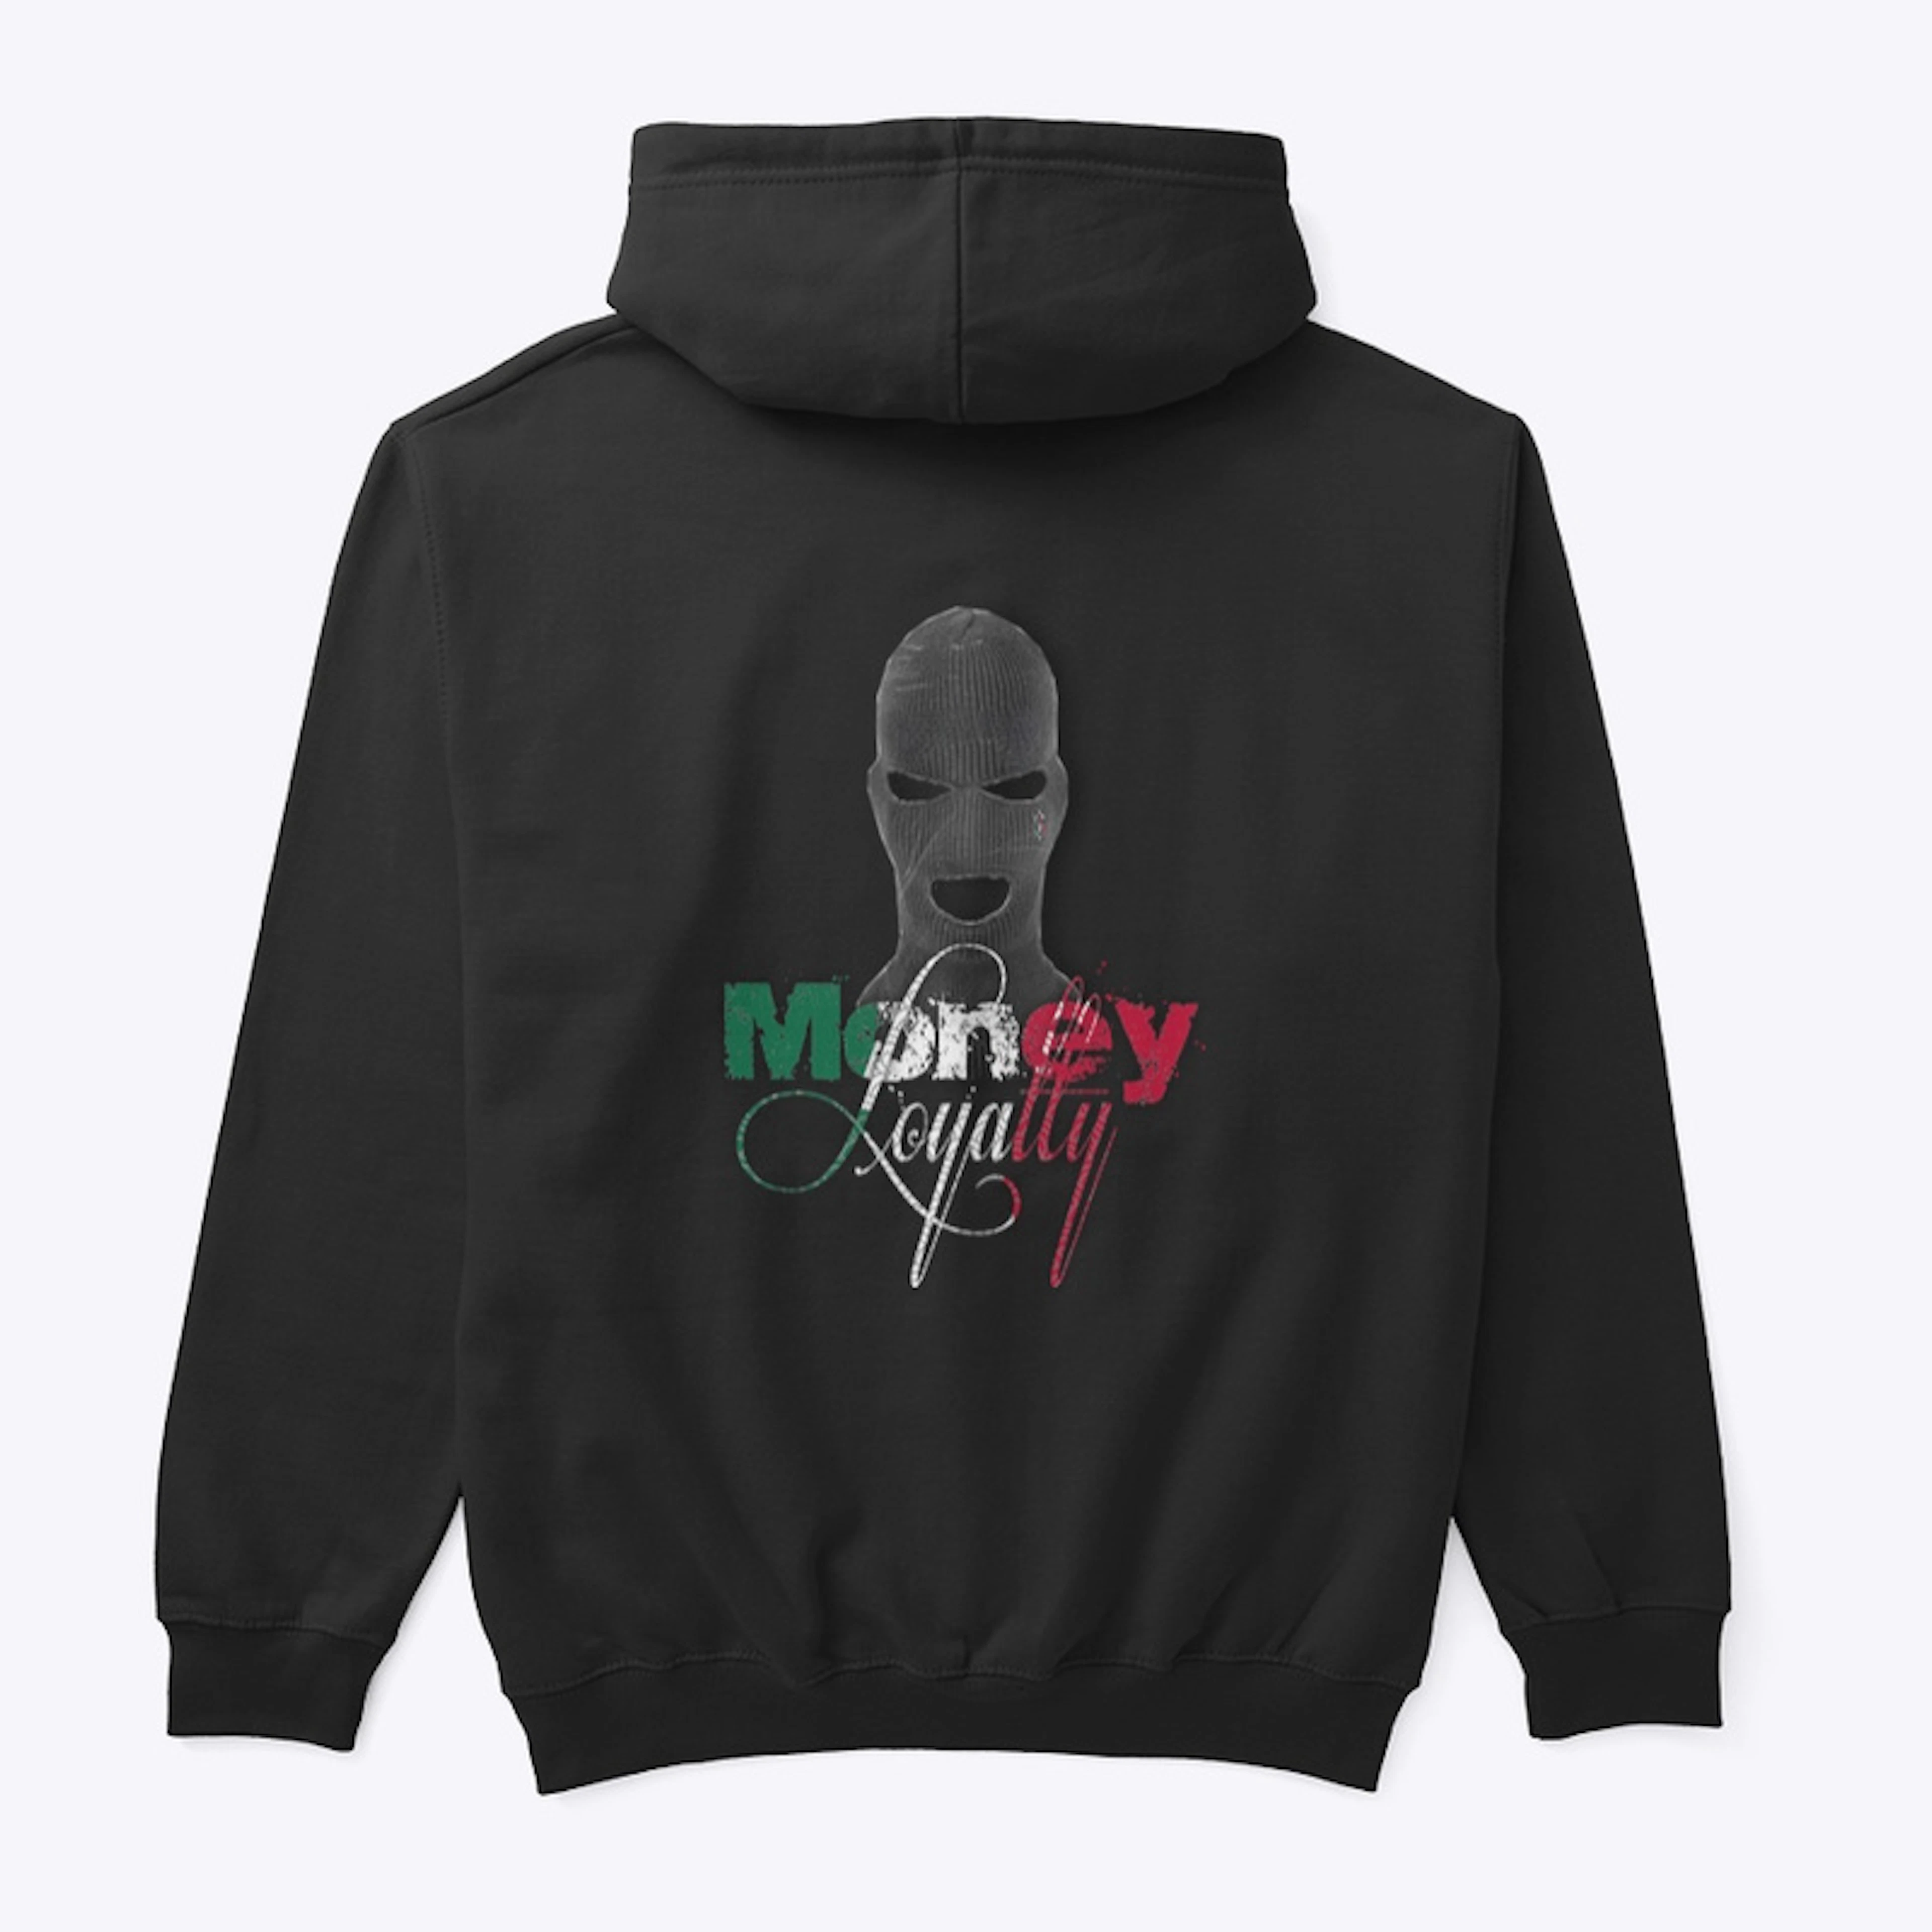 Money Loyalty (Mex) Pull Over 